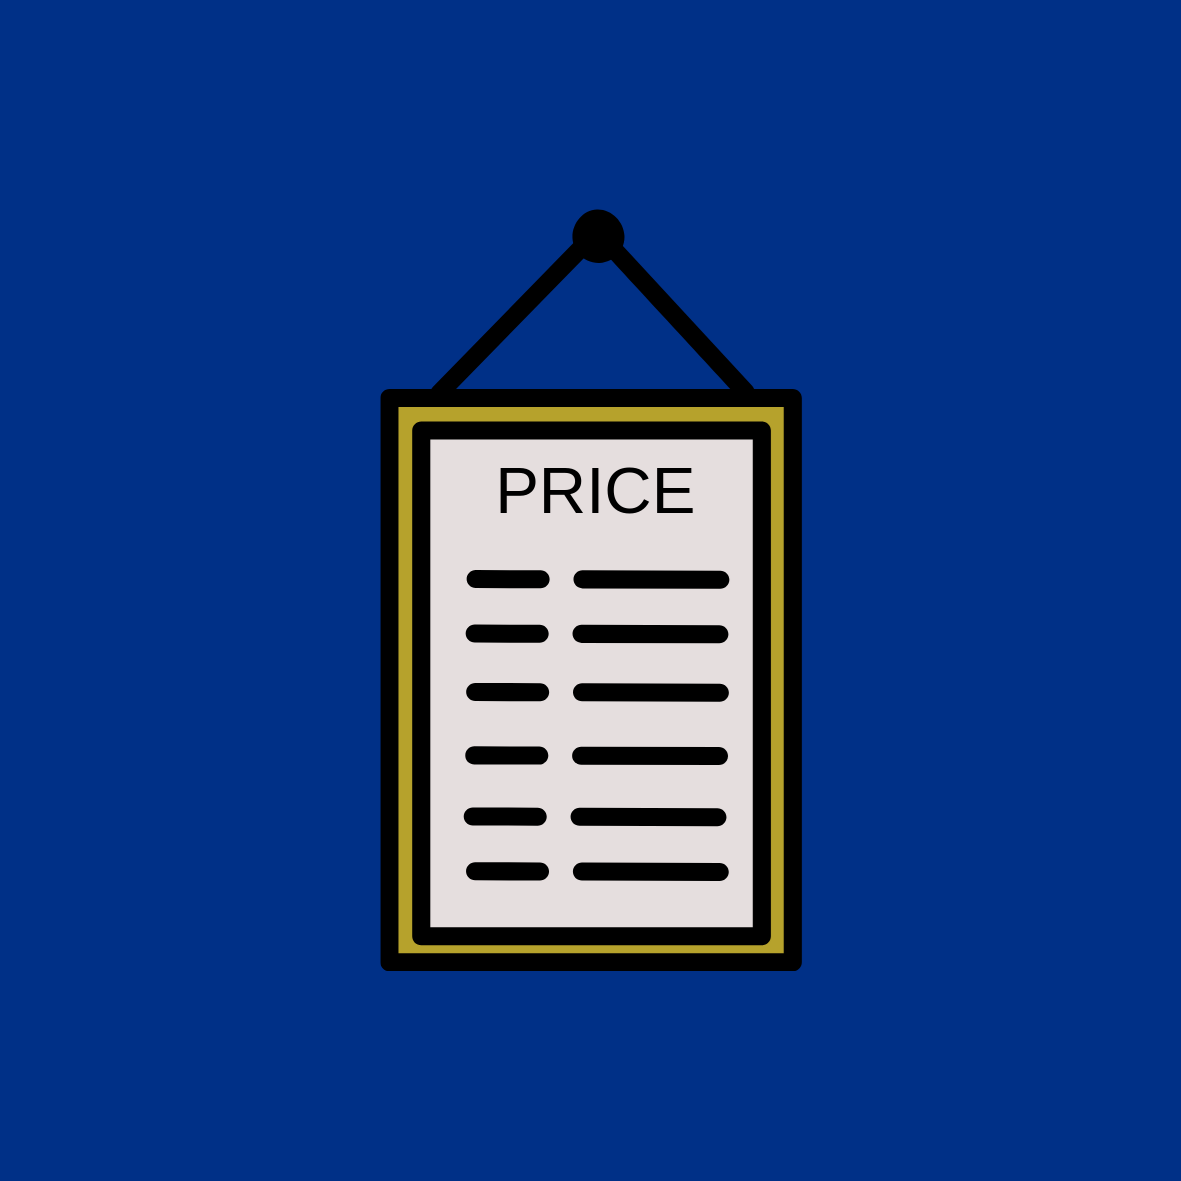 Image of a Price List